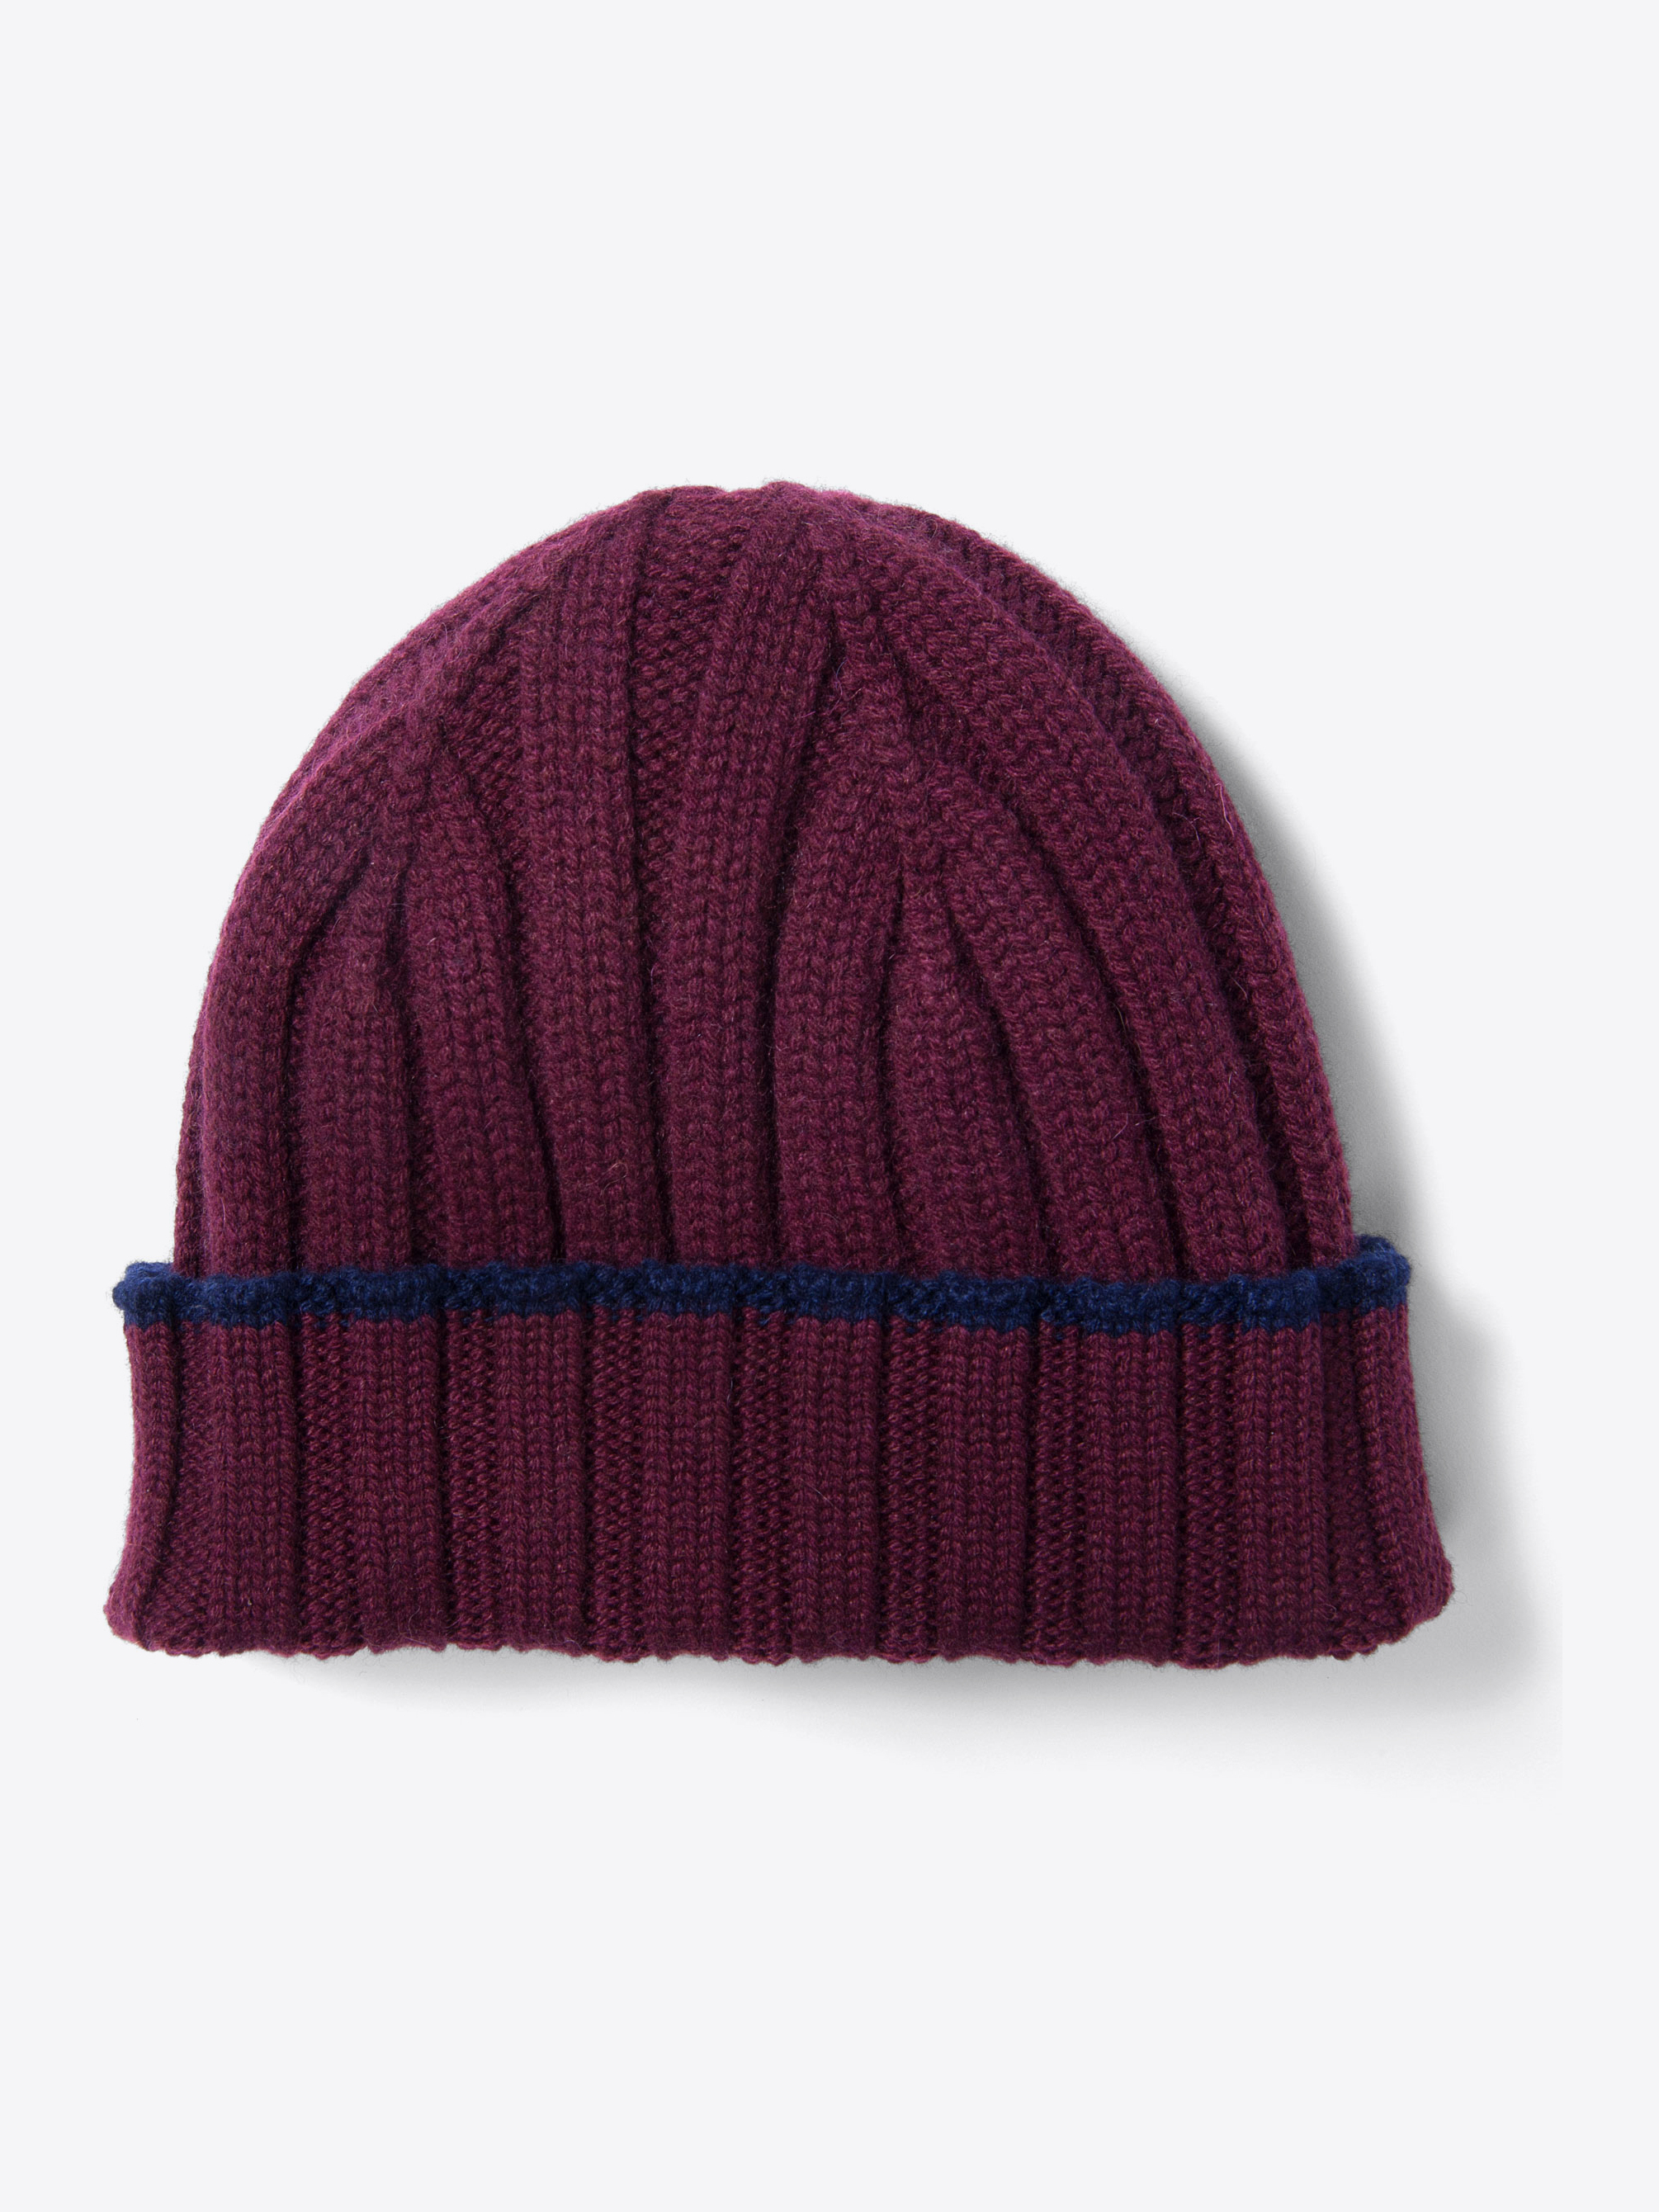 Zoom Image of Red and Navy Cashmere Knit Hat